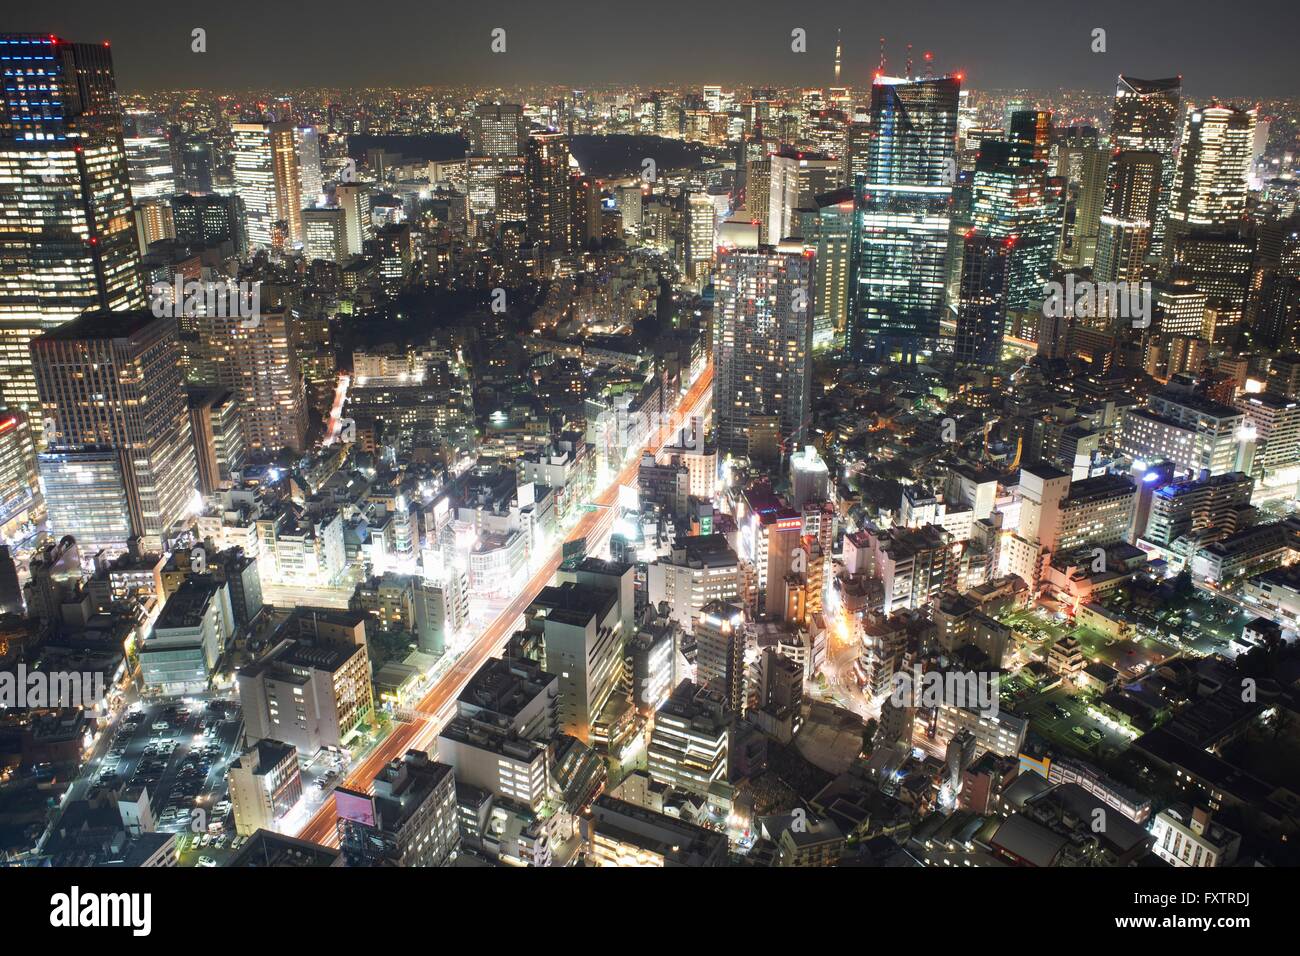 Cityscape view with skyscrapers and city lights at night, Tokyo, Japan Stock Photo